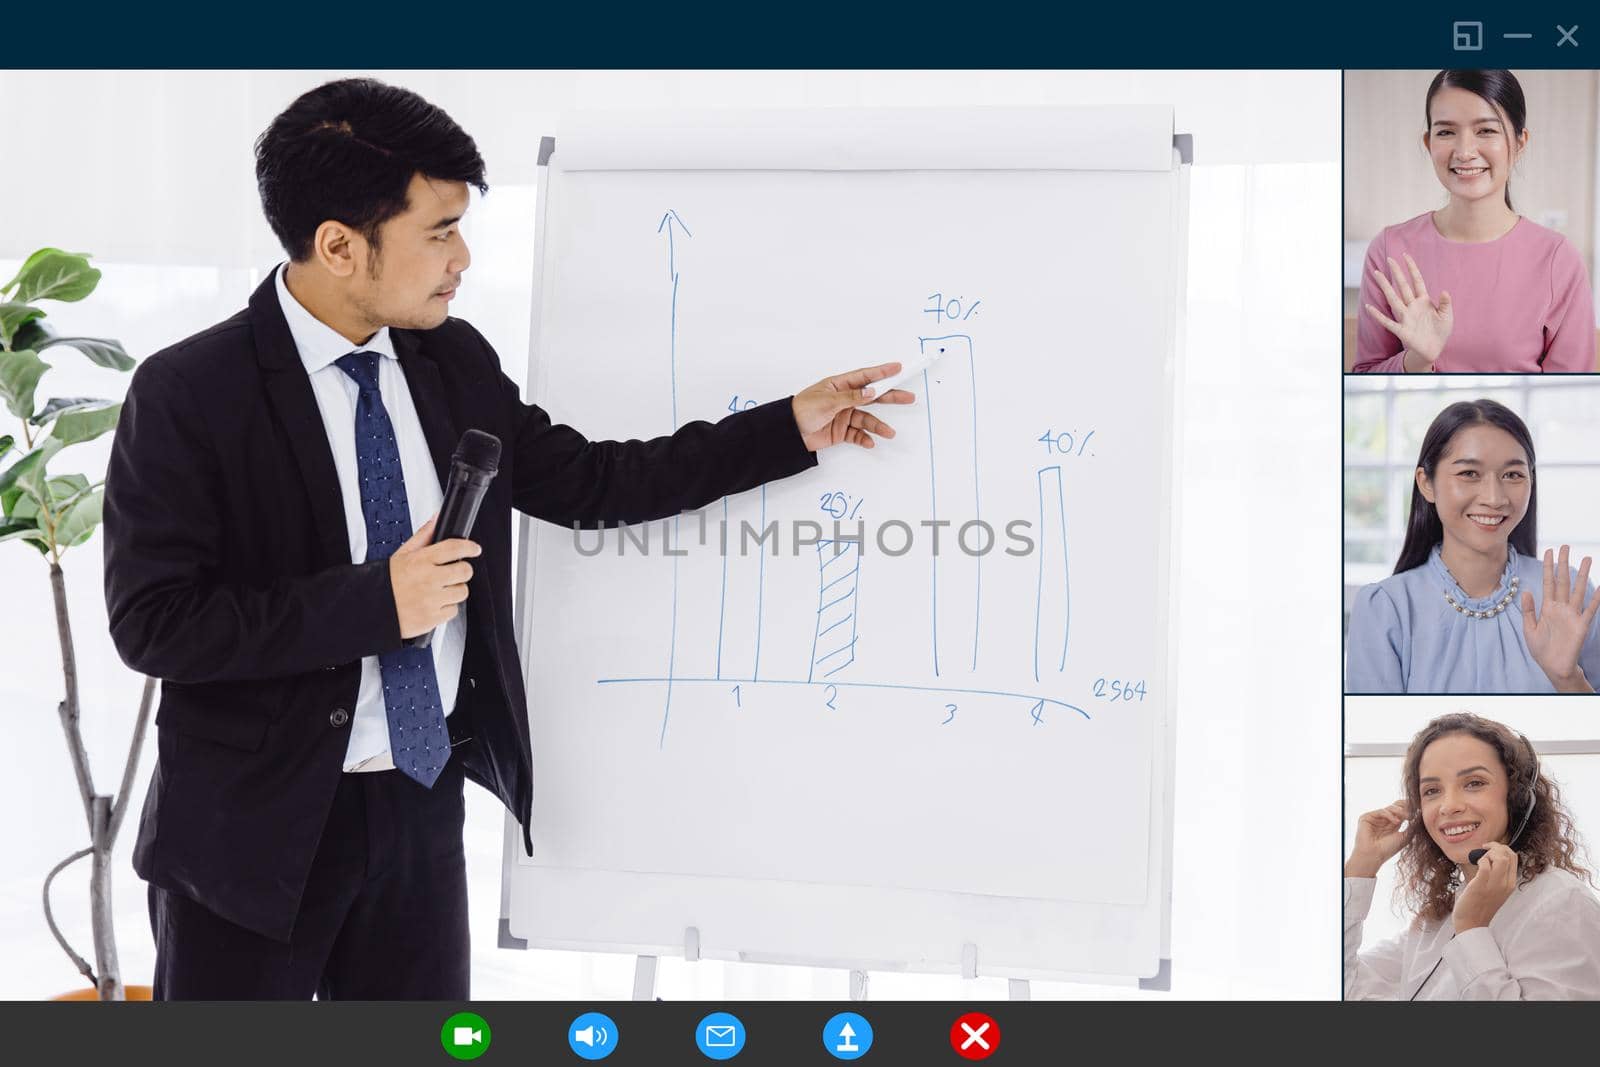 Online people lecture video call, Business meeting work from home distant communication over internet conference system screen concept.